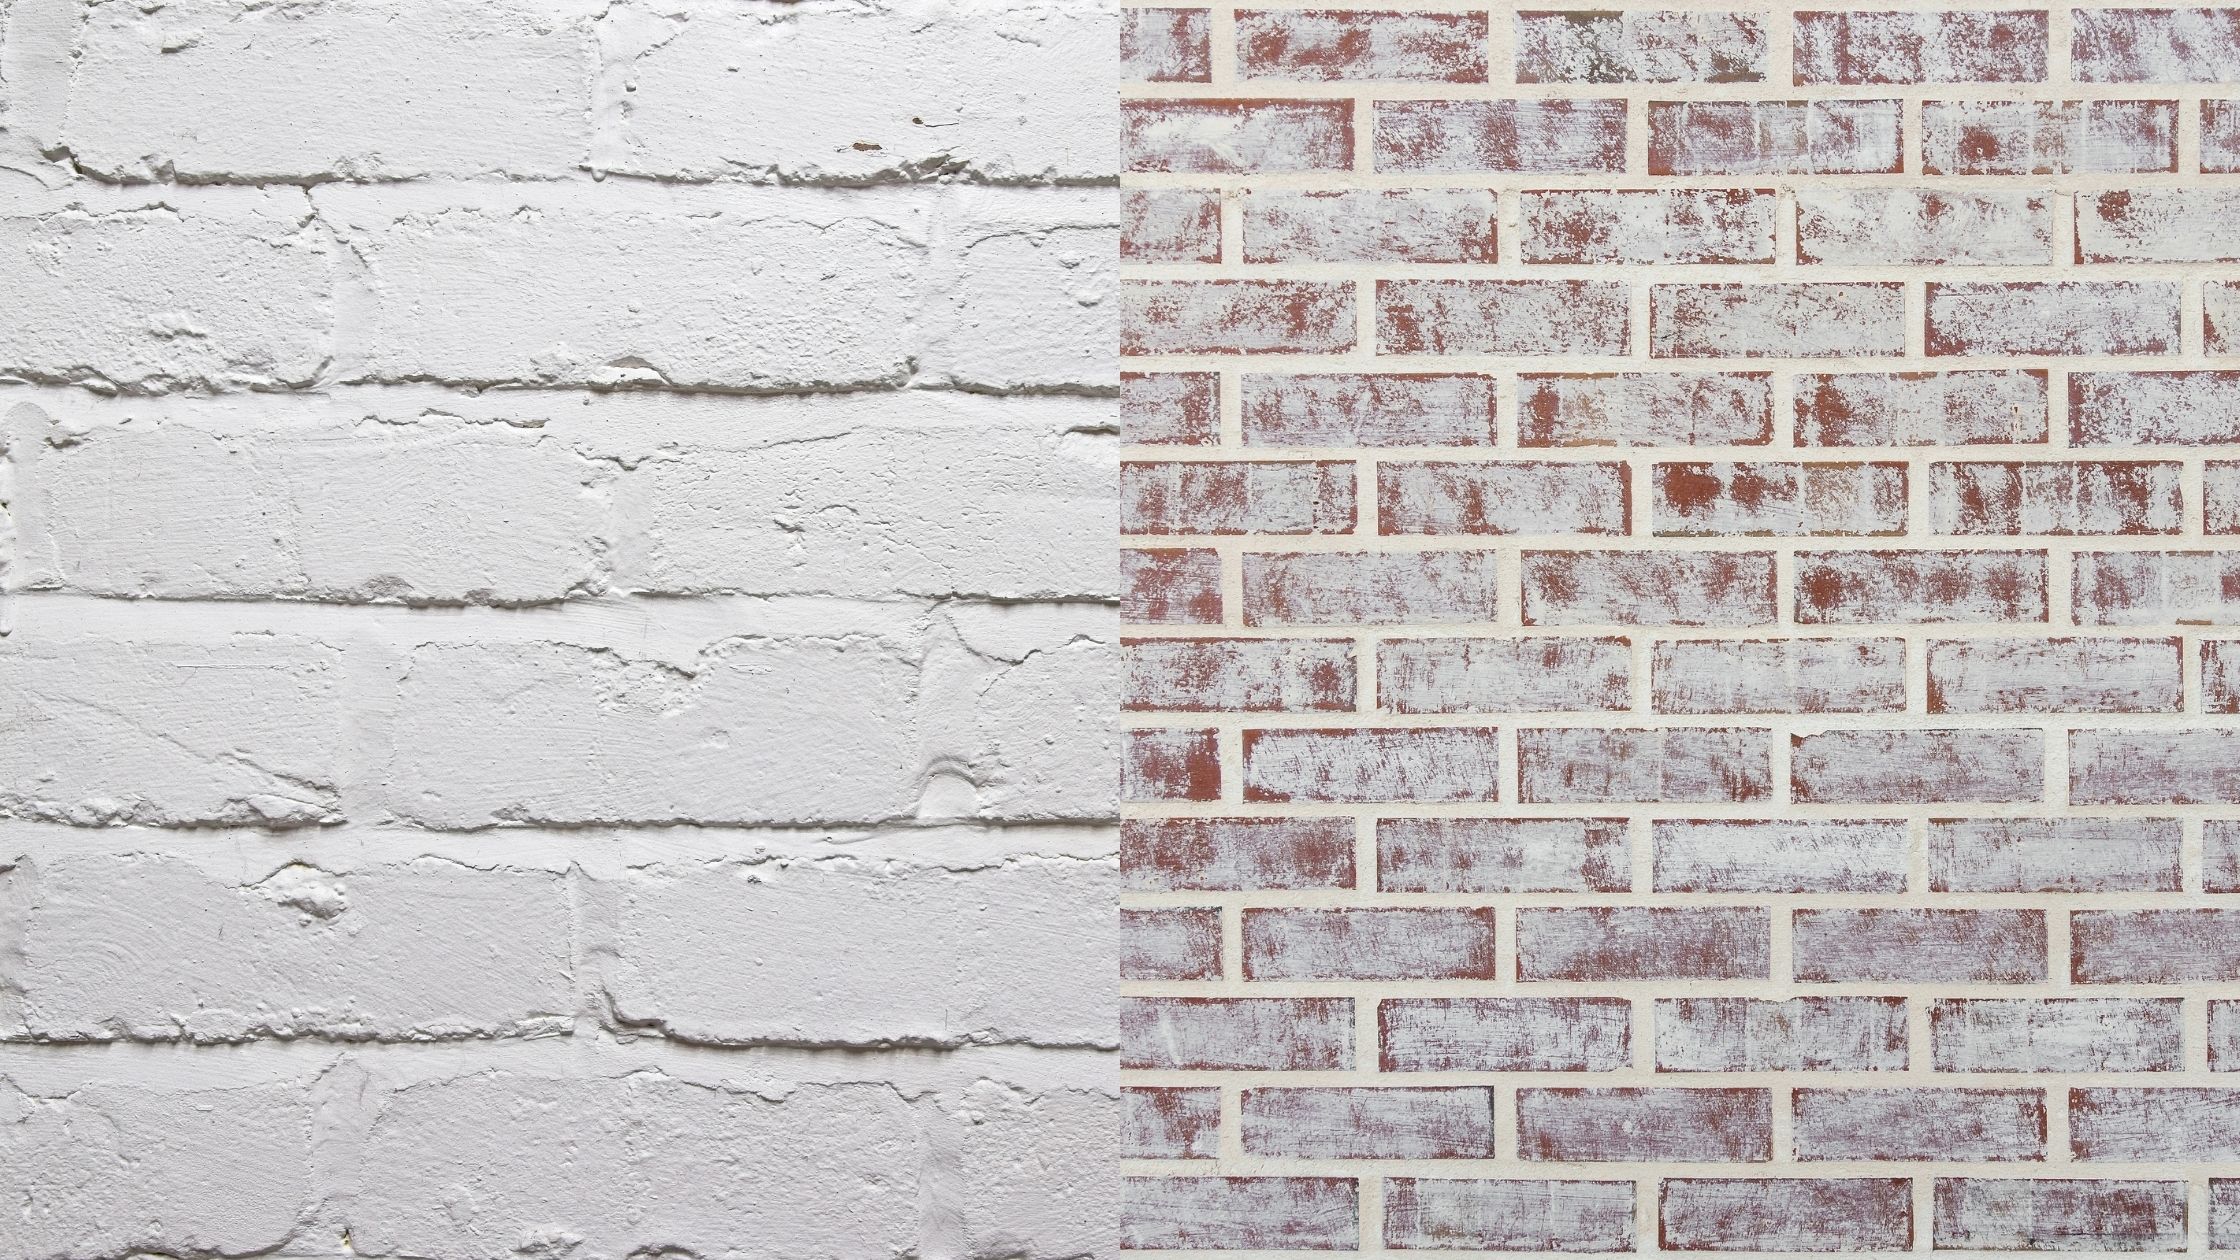 Whitewash vs Limewash - Which technique is better for my brick home